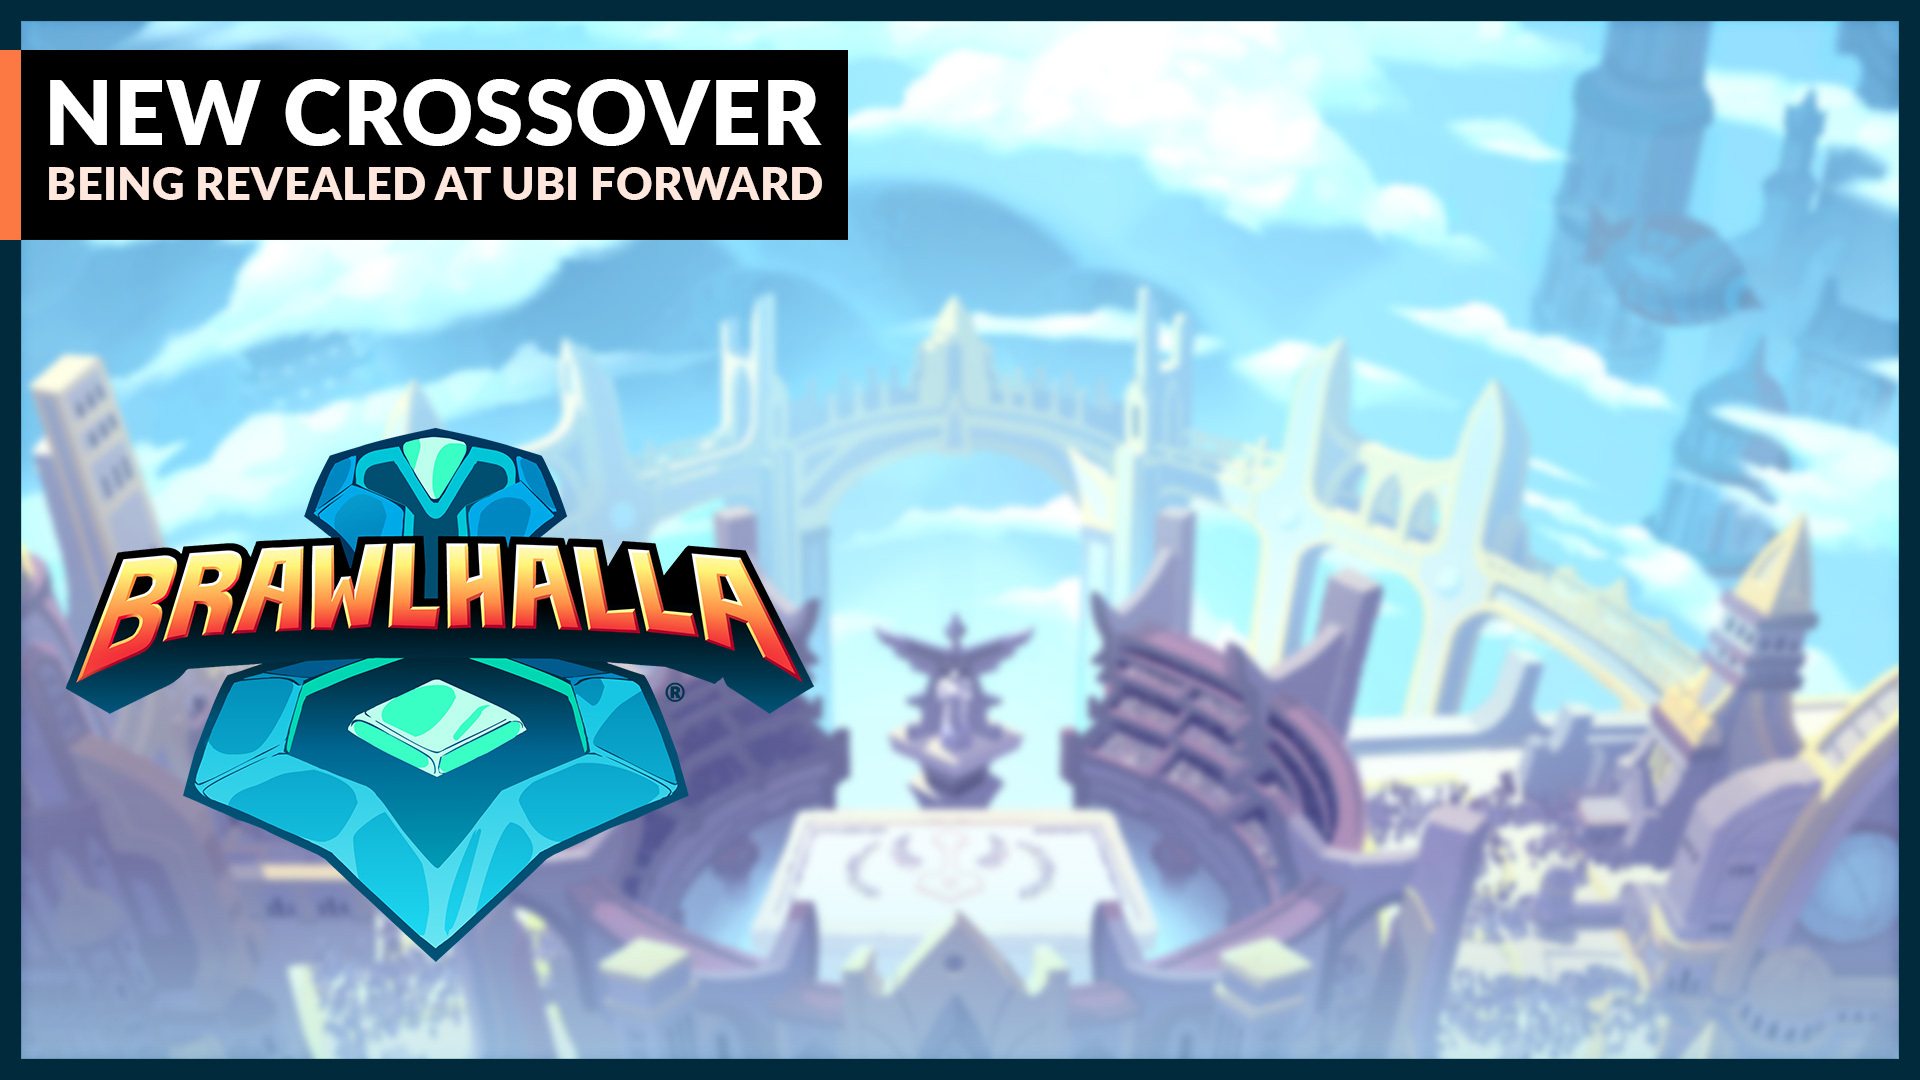 A new Crossover is being revealed at Ubisoft Forward!